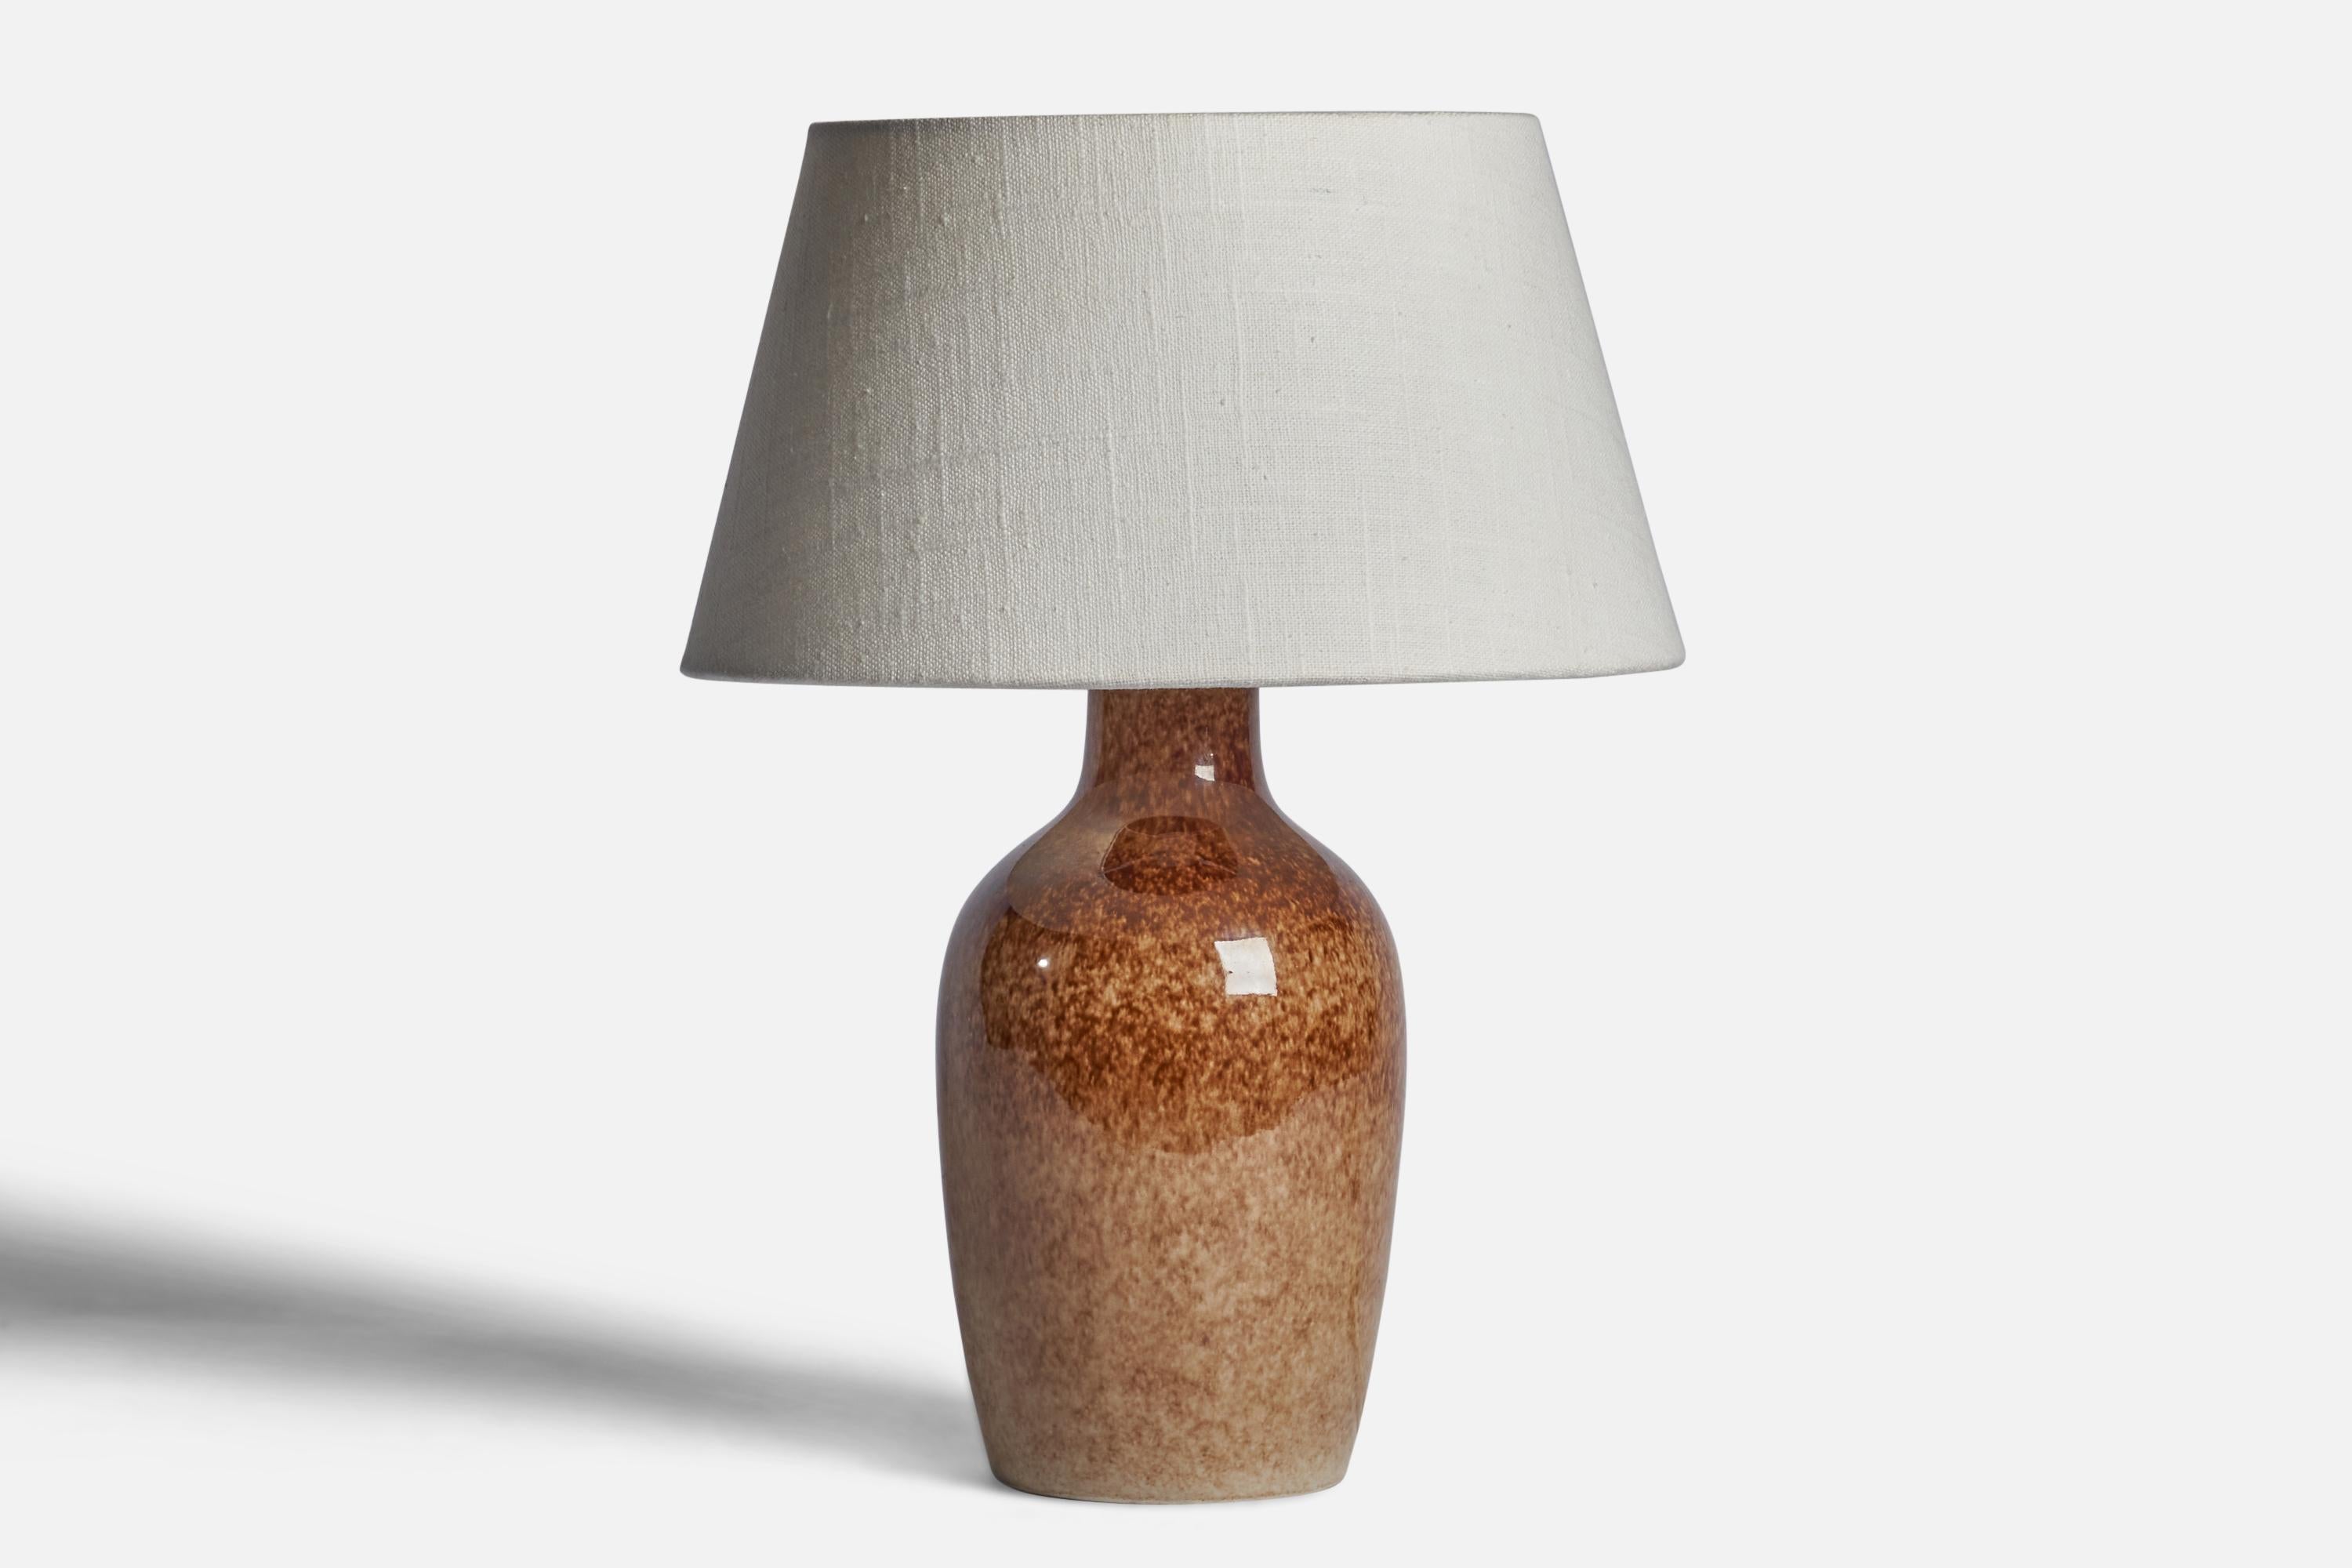 A table lamp designed by Carl-Harry Stålhane and Kent Ericsson, produced by Designhuset, Sweden, 1960s.

Dimensions of Lamp (inches): 10.75” H x 4.75” Diameter
Dimensions of Shade (inches): 7” Top Diameter x 10” Bottom Diameter x 5.5” H 
Dimensions